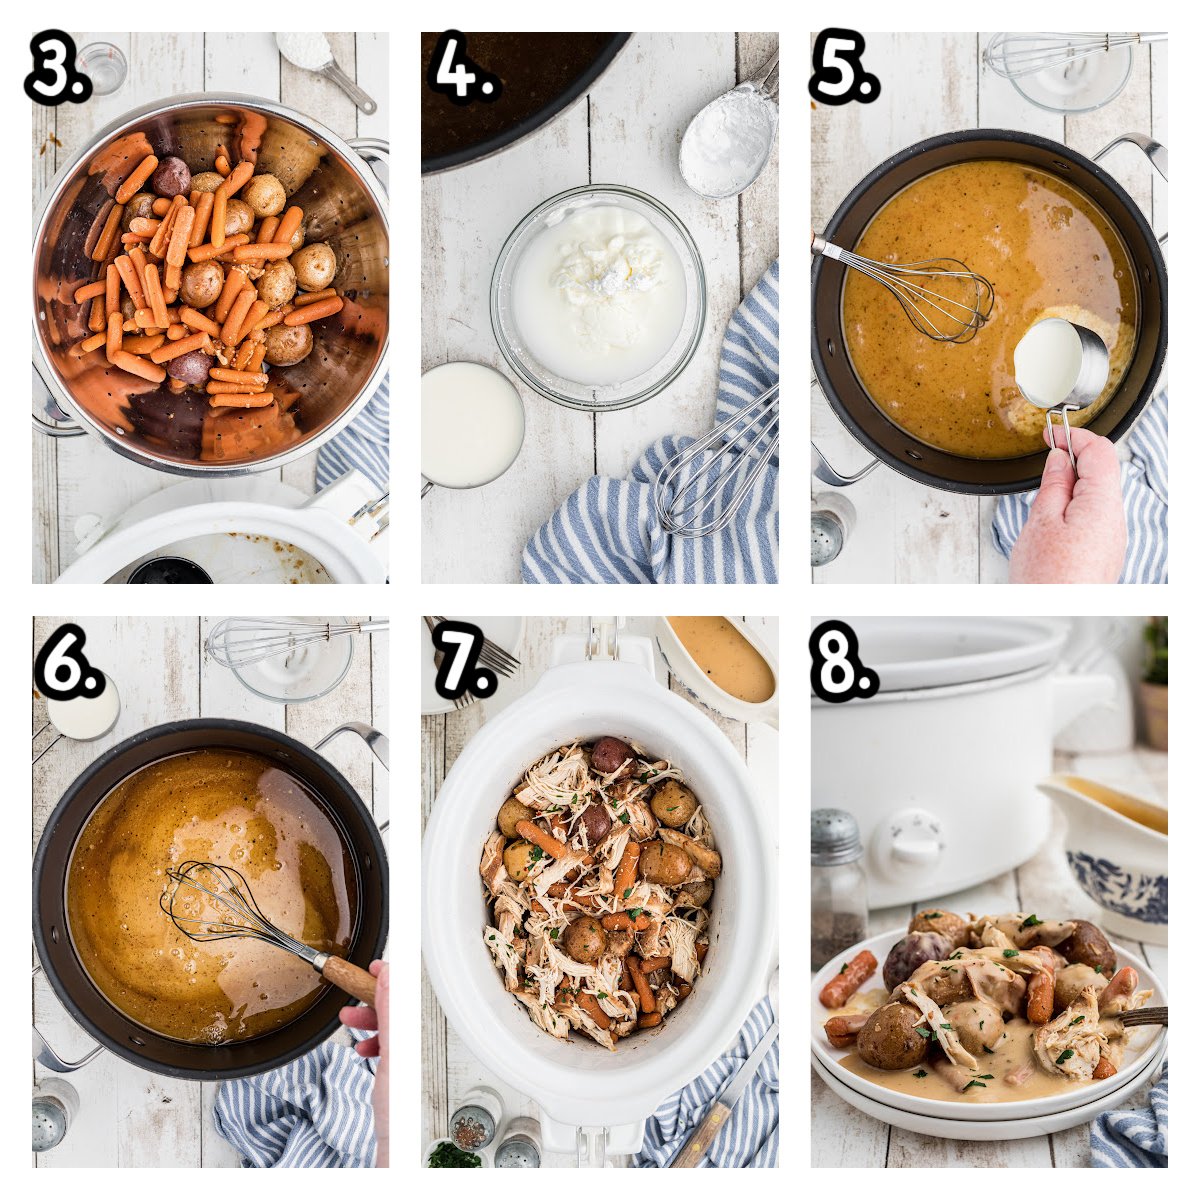 6 images of how to finish italian chicken and gravy in the slow cooker.